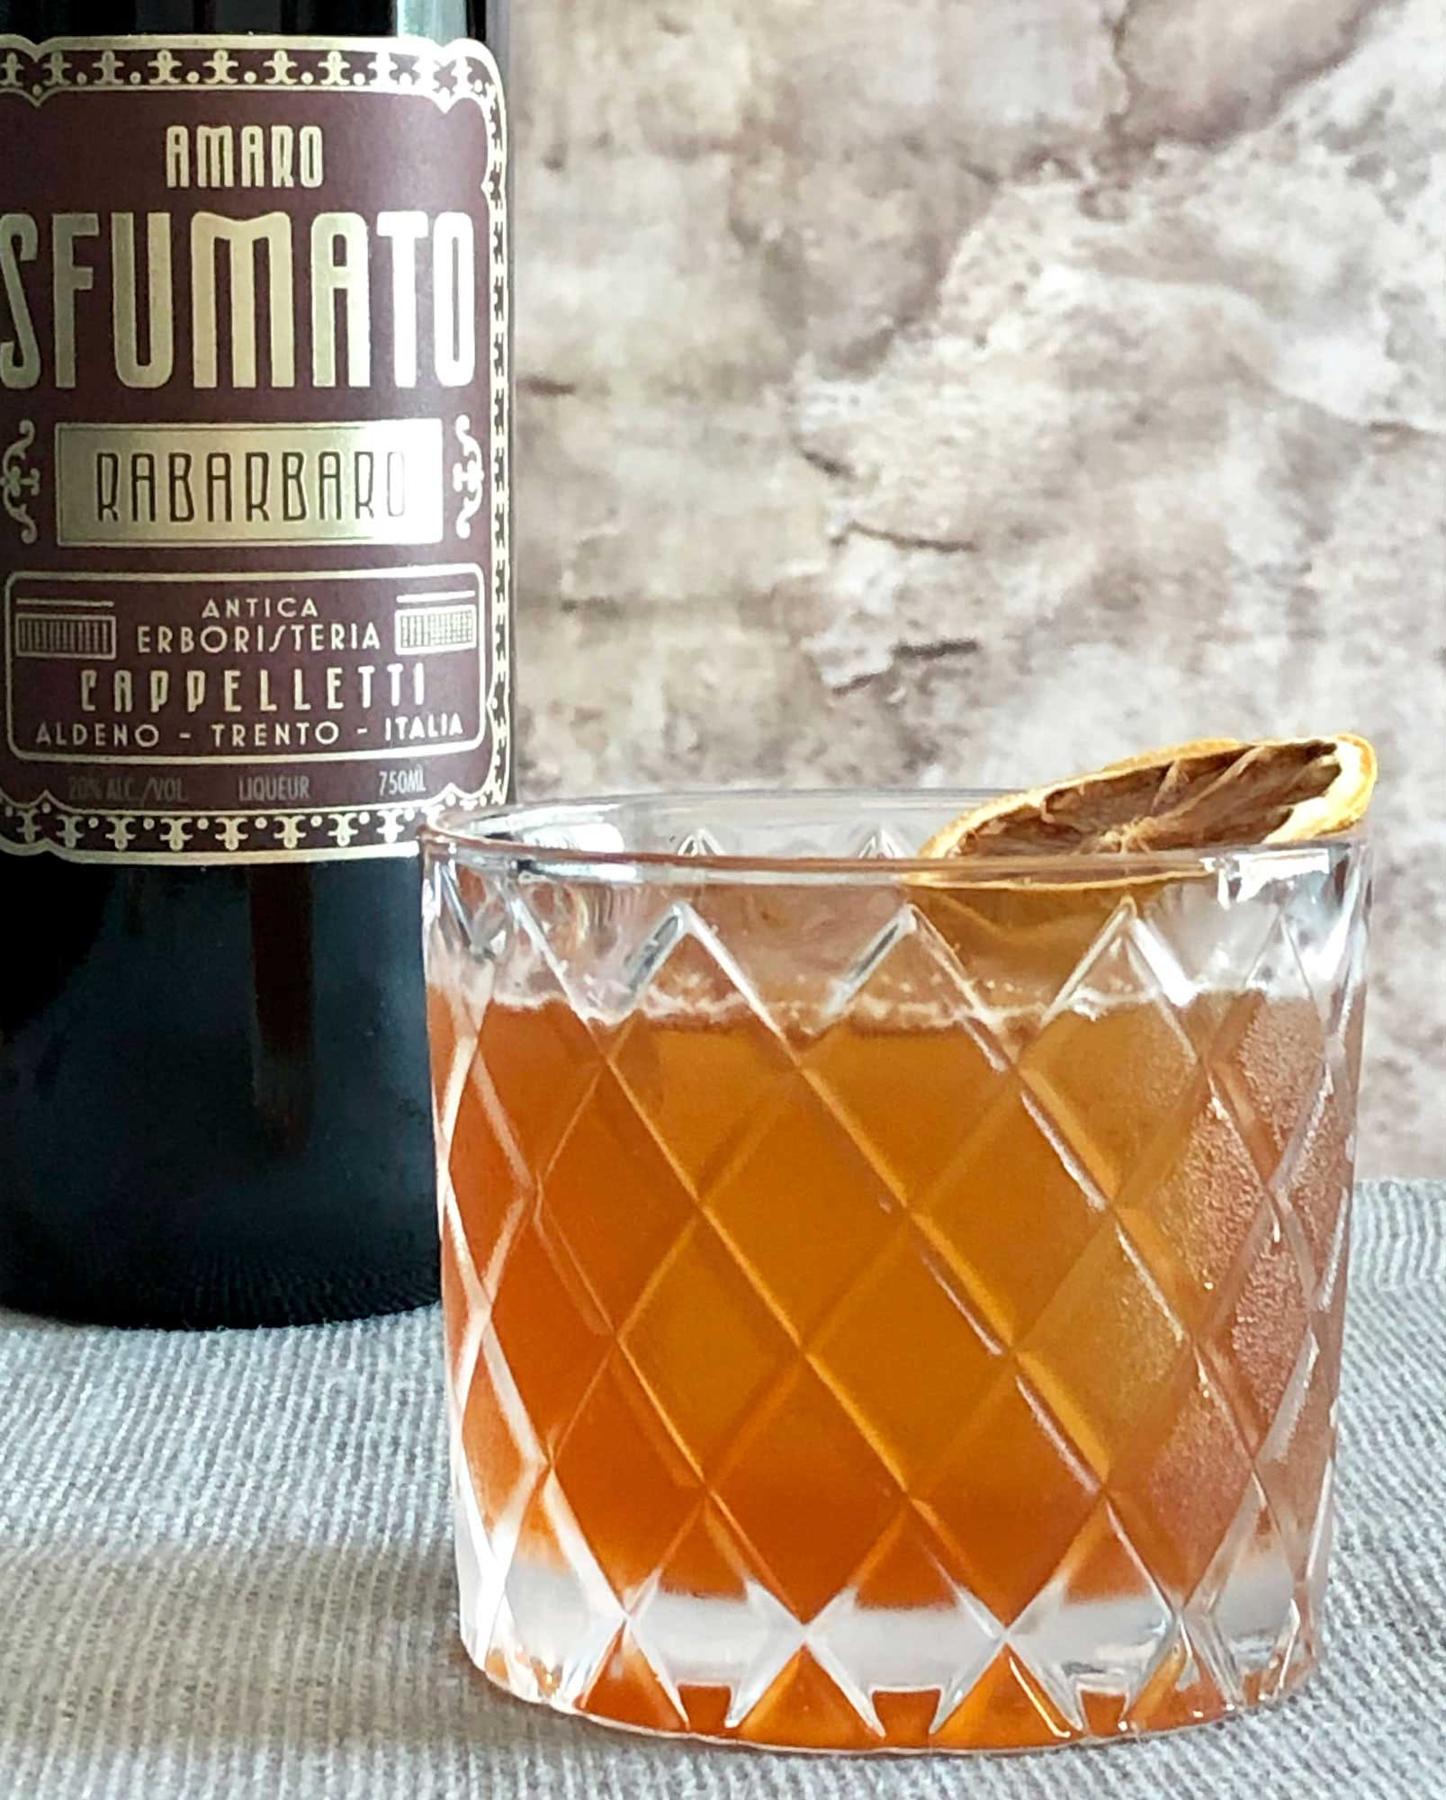 An example of the Welcome, Ghosts, the mixed drink (drink), by Nic Christiansen, Louisville, KY, featuring Copper & Kings Immature Brandy, Amaro Sfumato Rabarbaro, lemon juice, honey syrup, Angostura bitters, Bittermens Xocolatl Mole Bitters, and lemon twist; photo by Lee Edwards